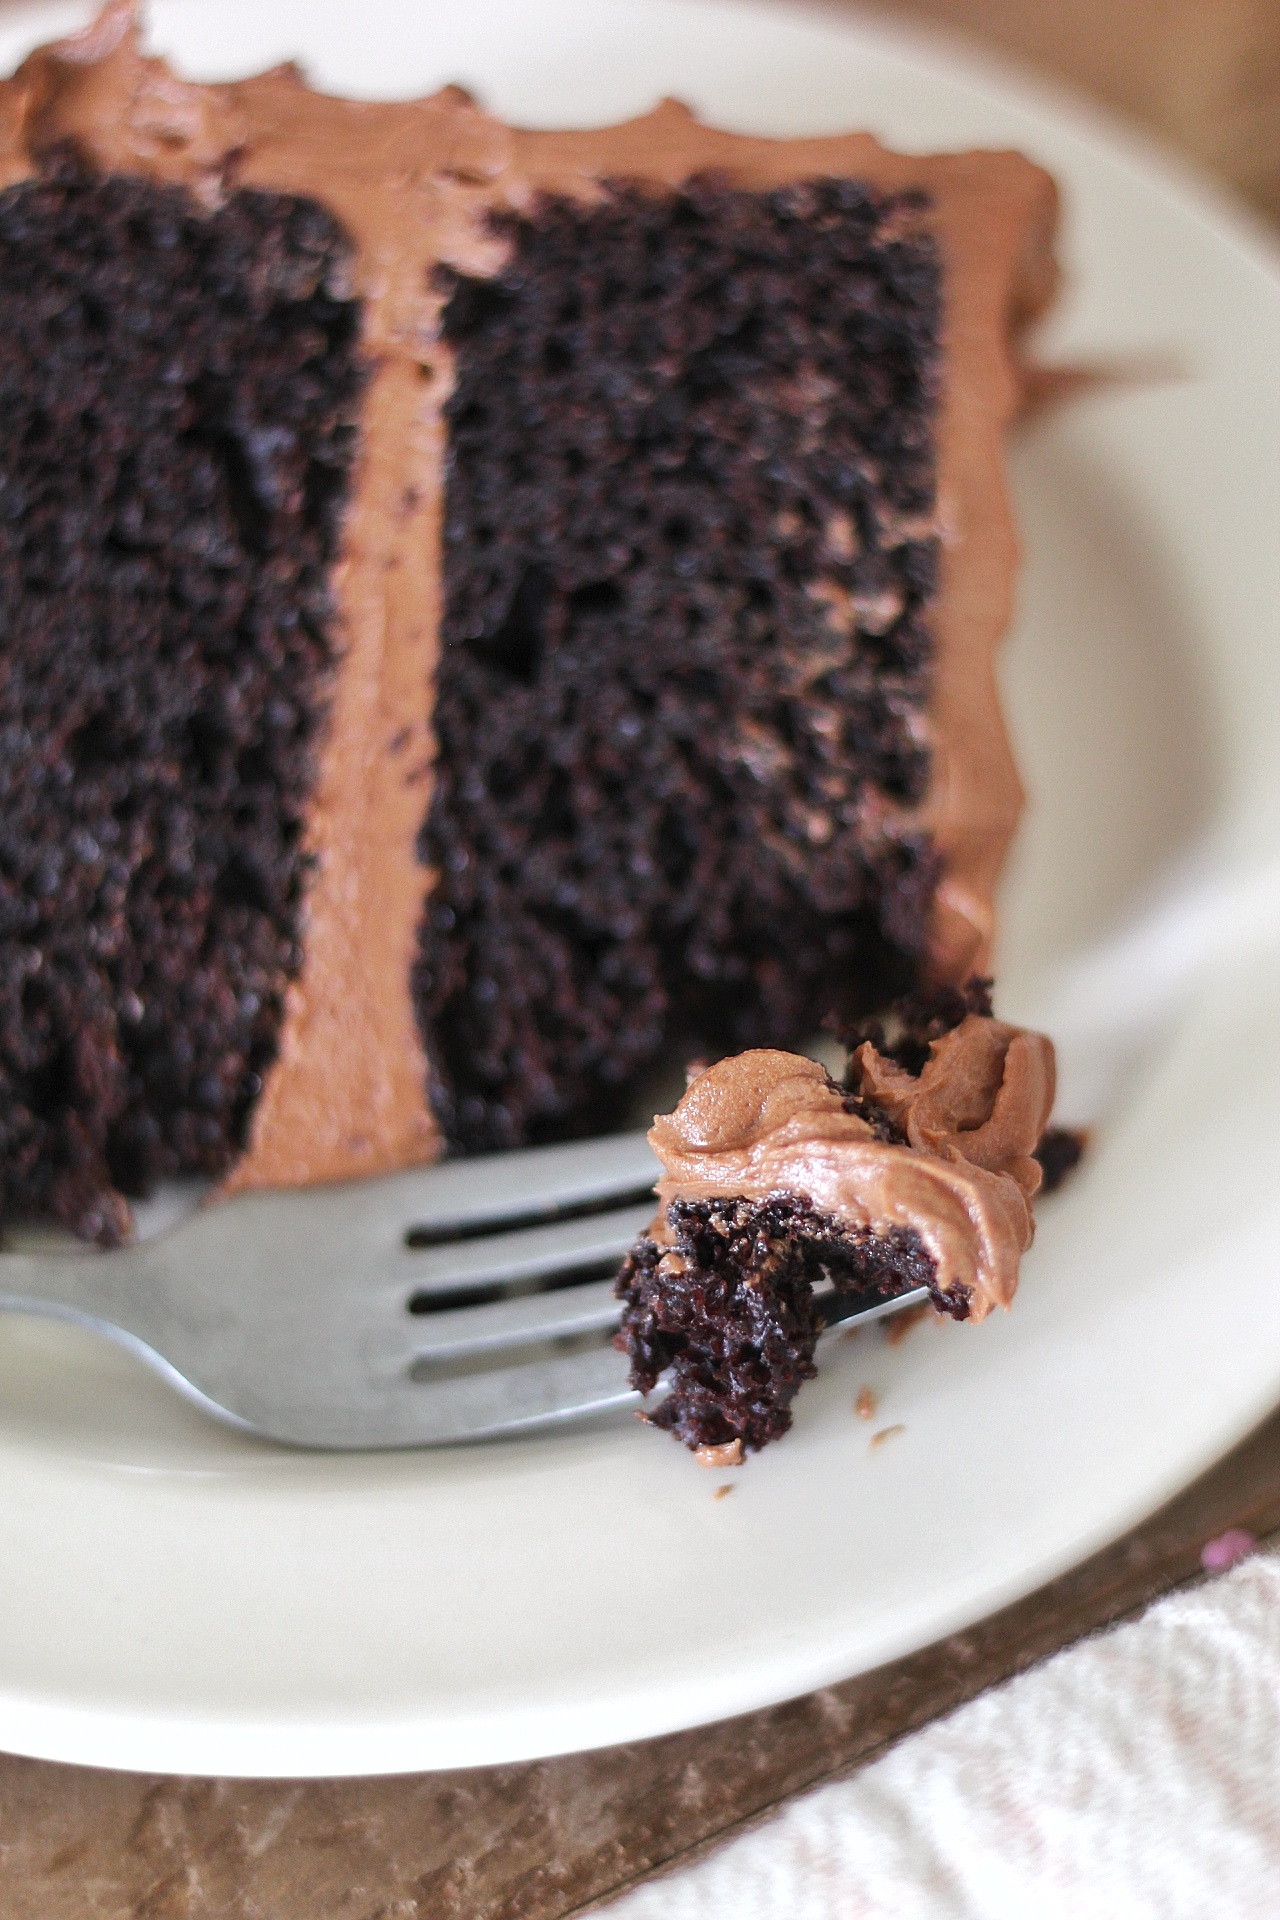 The Most Delicious Chocolate Cake - rich, moist and decadent chocolate cake layers with silky smooth chocolate buttercream #chocolatecake #bestchocolatecake #favoritechocolatecake #easychocolatecake #easychocolatecake #easychocolatecakerecipe #chocolatecakerecipe #chocolate #chocolateicing #icingrecipe #frostingrecipe #chocolatefrochocake #chocolatefrohowseasy #chocolate cake birthdaycake #howtomakebuttercreamfrosting